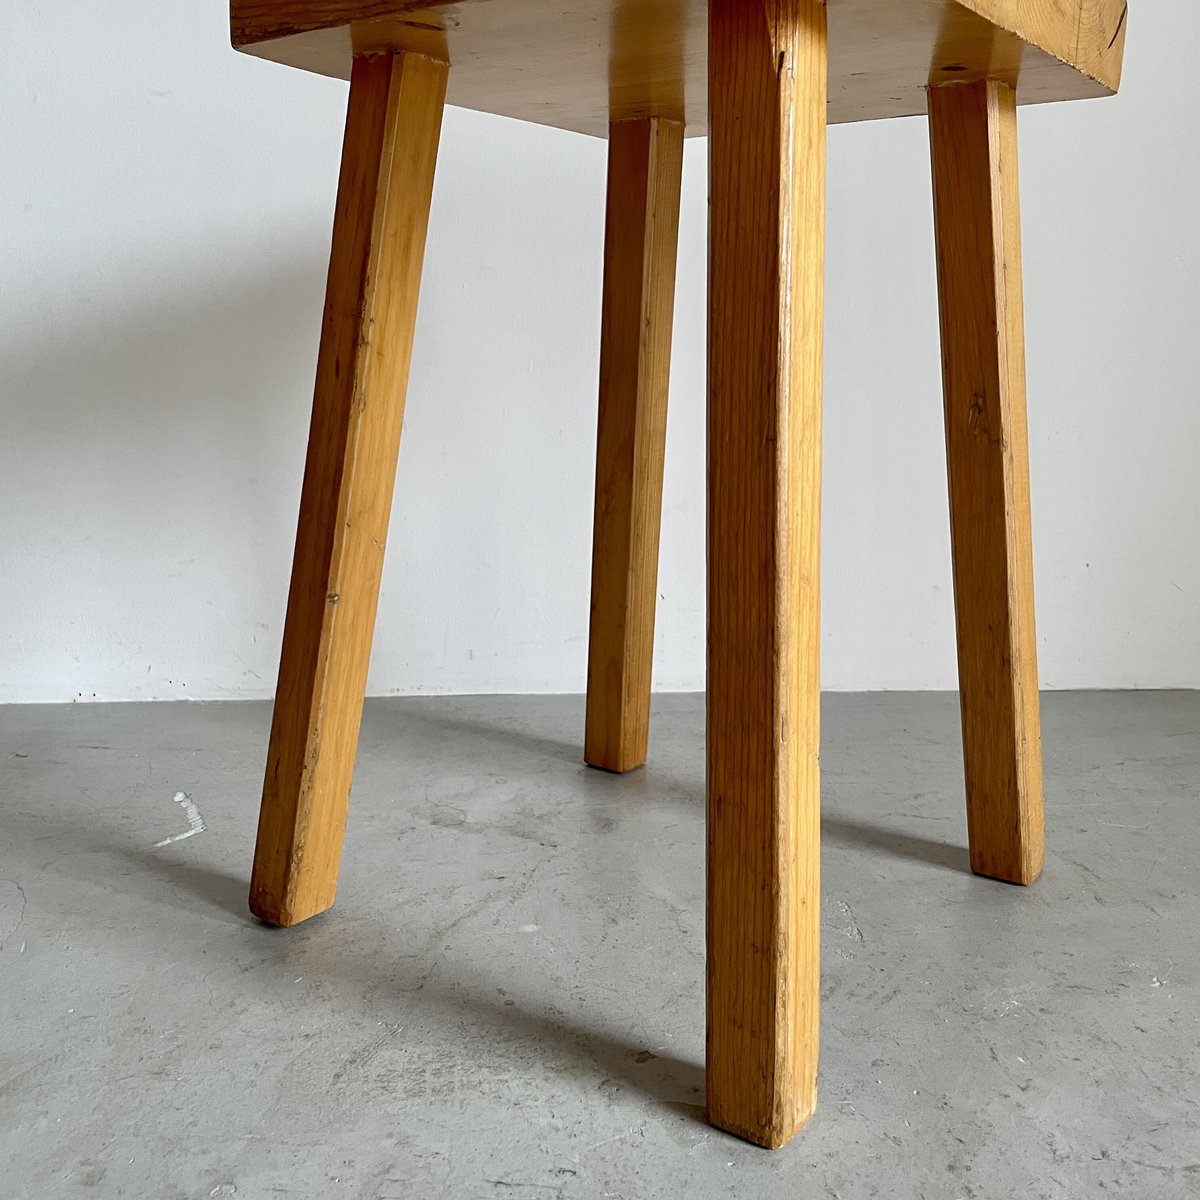 Square Seat Stool for Les arcs-5 / Charlotte Perriand / France, c1980